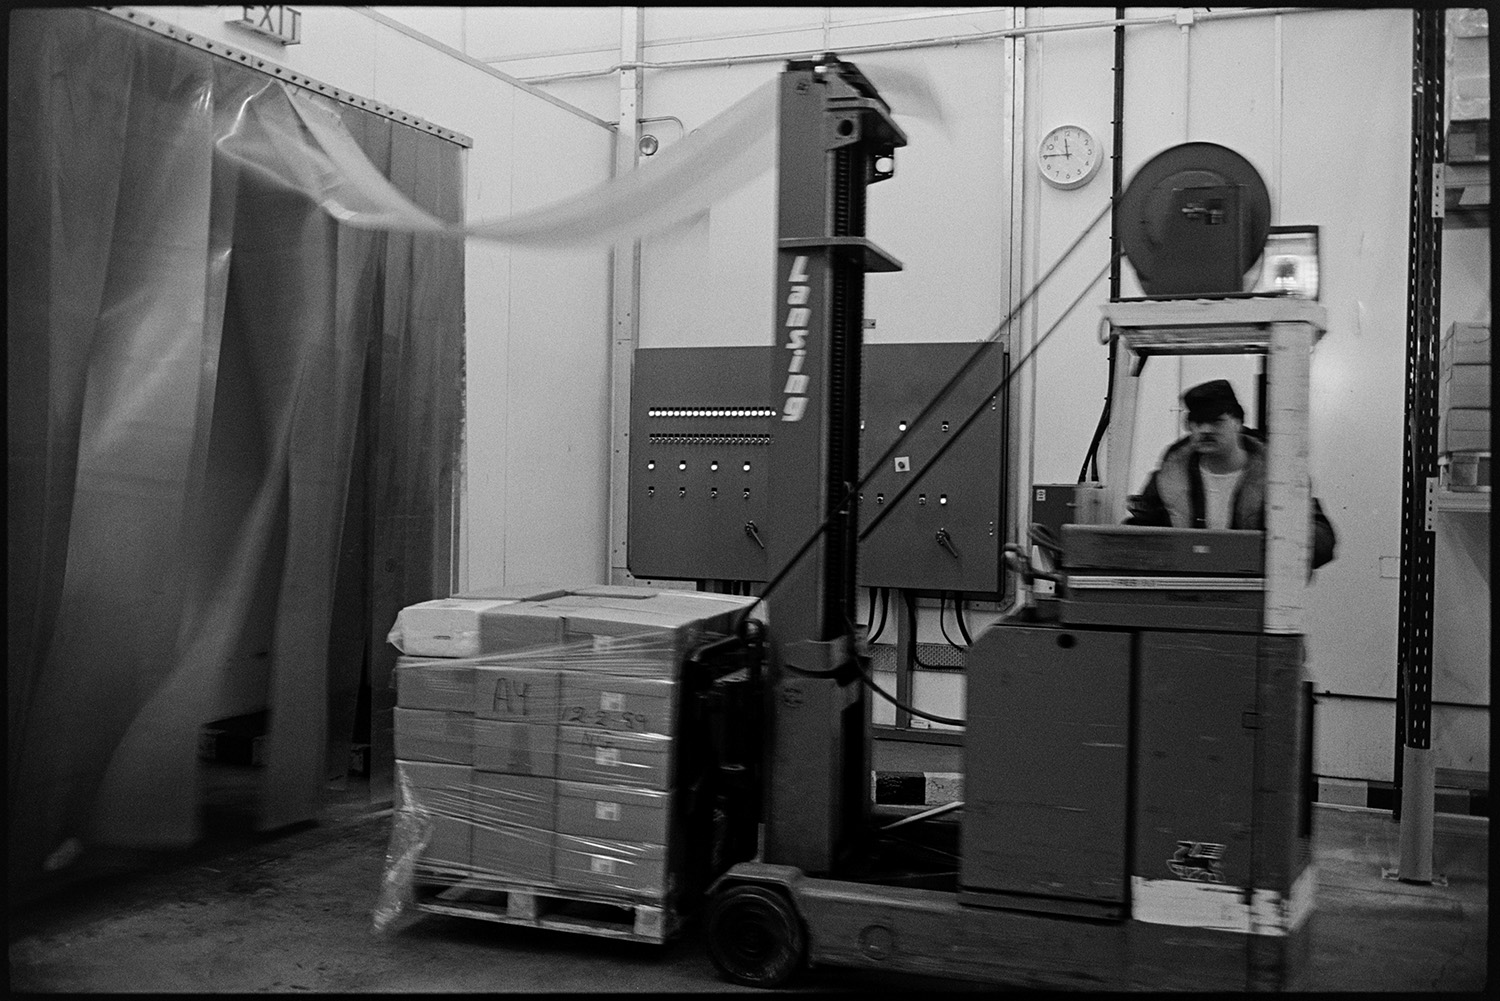 Men working in cheese factory. 
[A man operating a fork lift truck carrying boxes at the Dairy Crest North Devon Cheese Factory.]